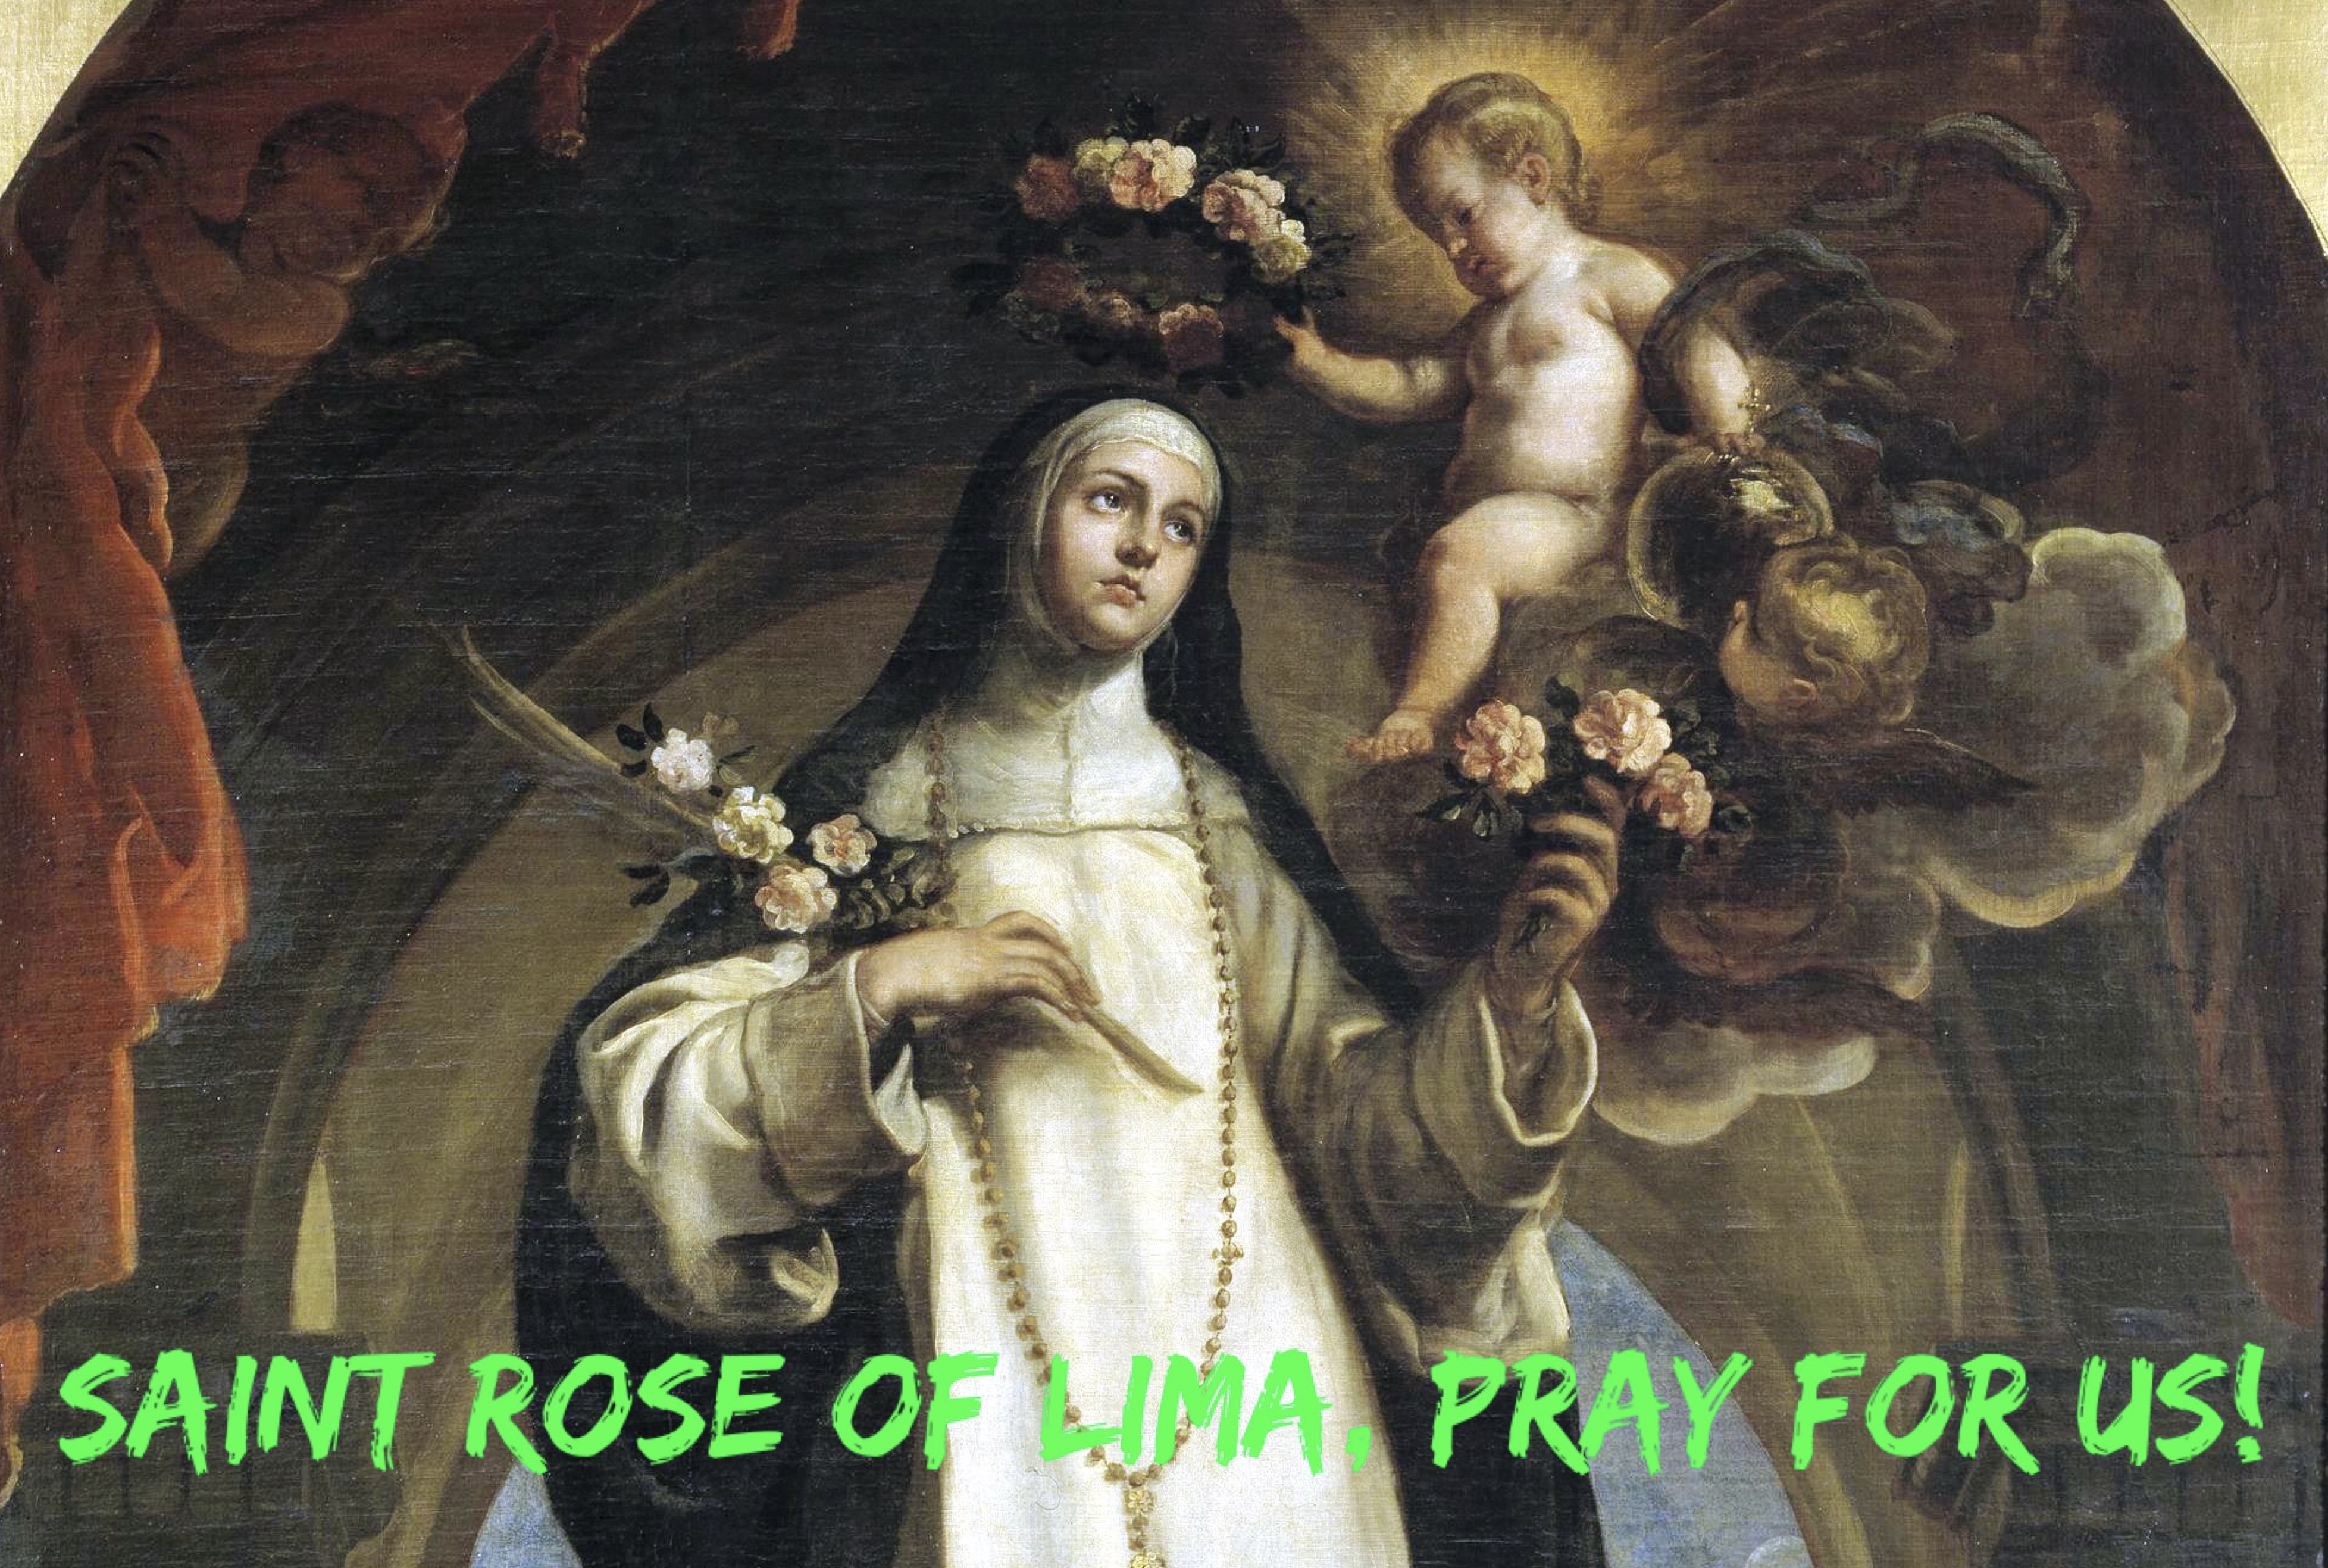 23rd August - Saint Rose of Lima